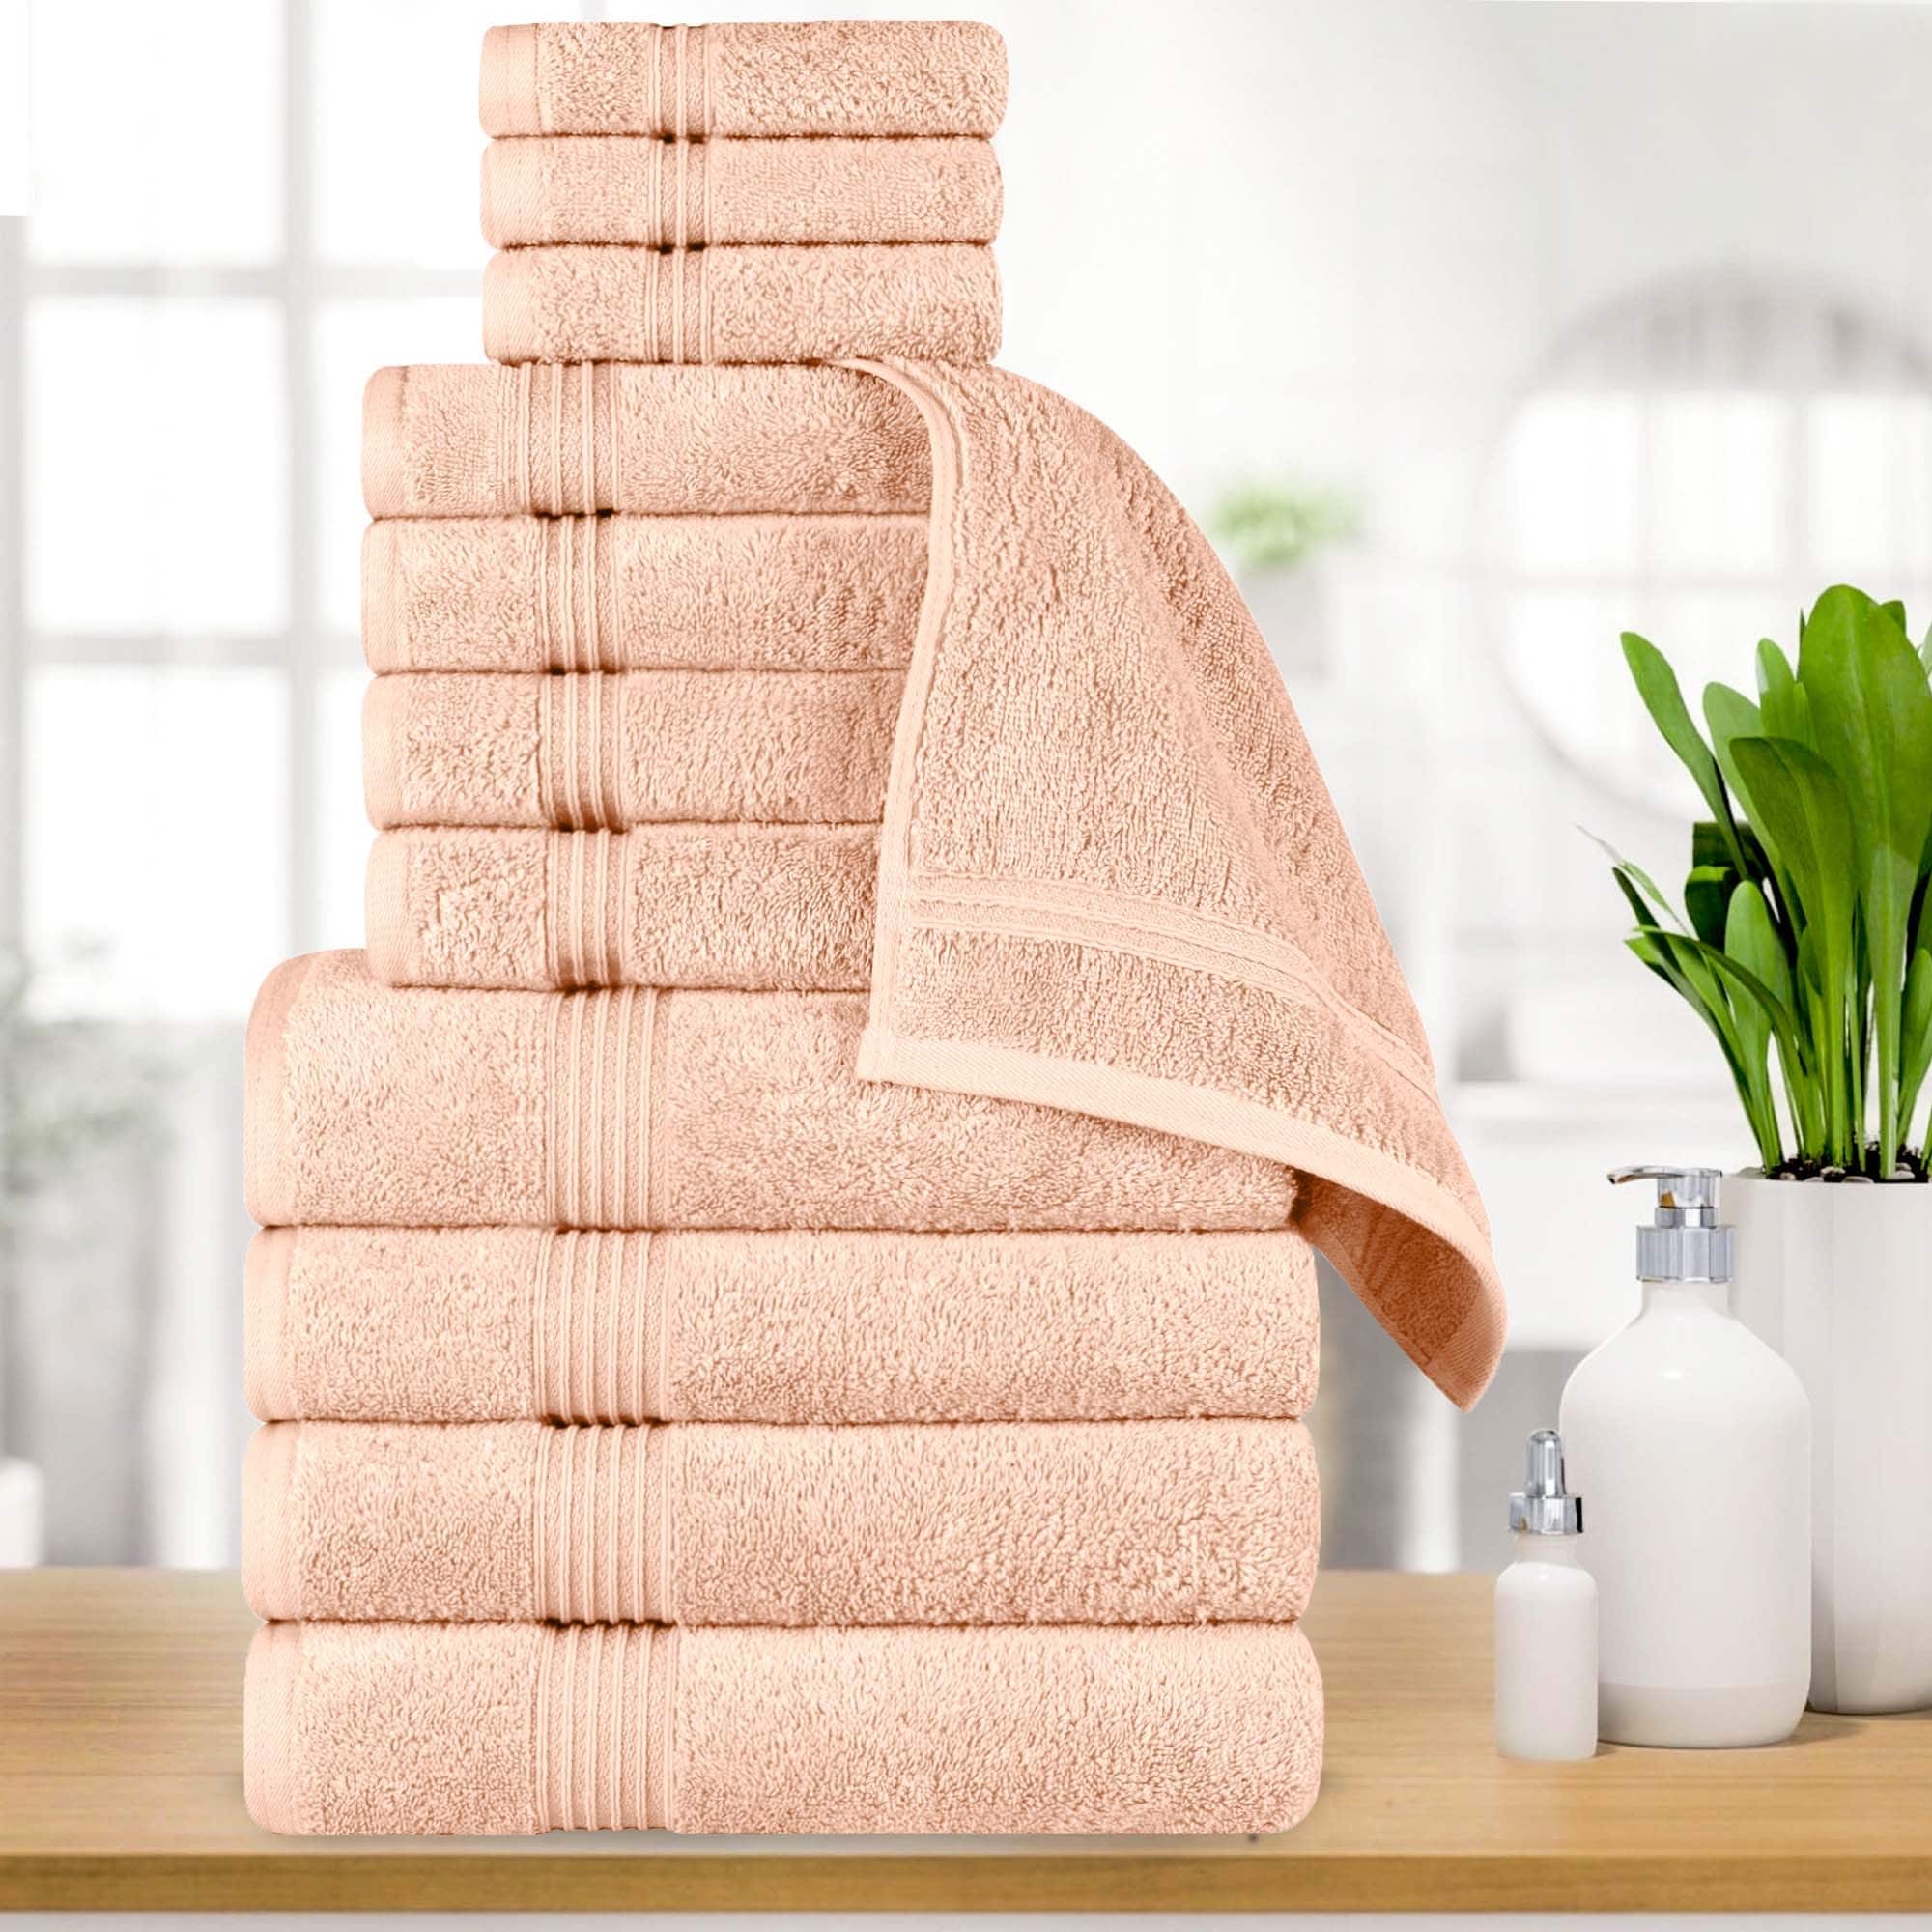 https://ak1.ostkcdn.com/images/products/is/images/direct/515941b76315ef7bad128cc6c8f94328bcdc64e1/Superior-Heritage-Egyptian-Cotton-Heavyweight-12-Piece-Bathroom-Towel-Set.jpg